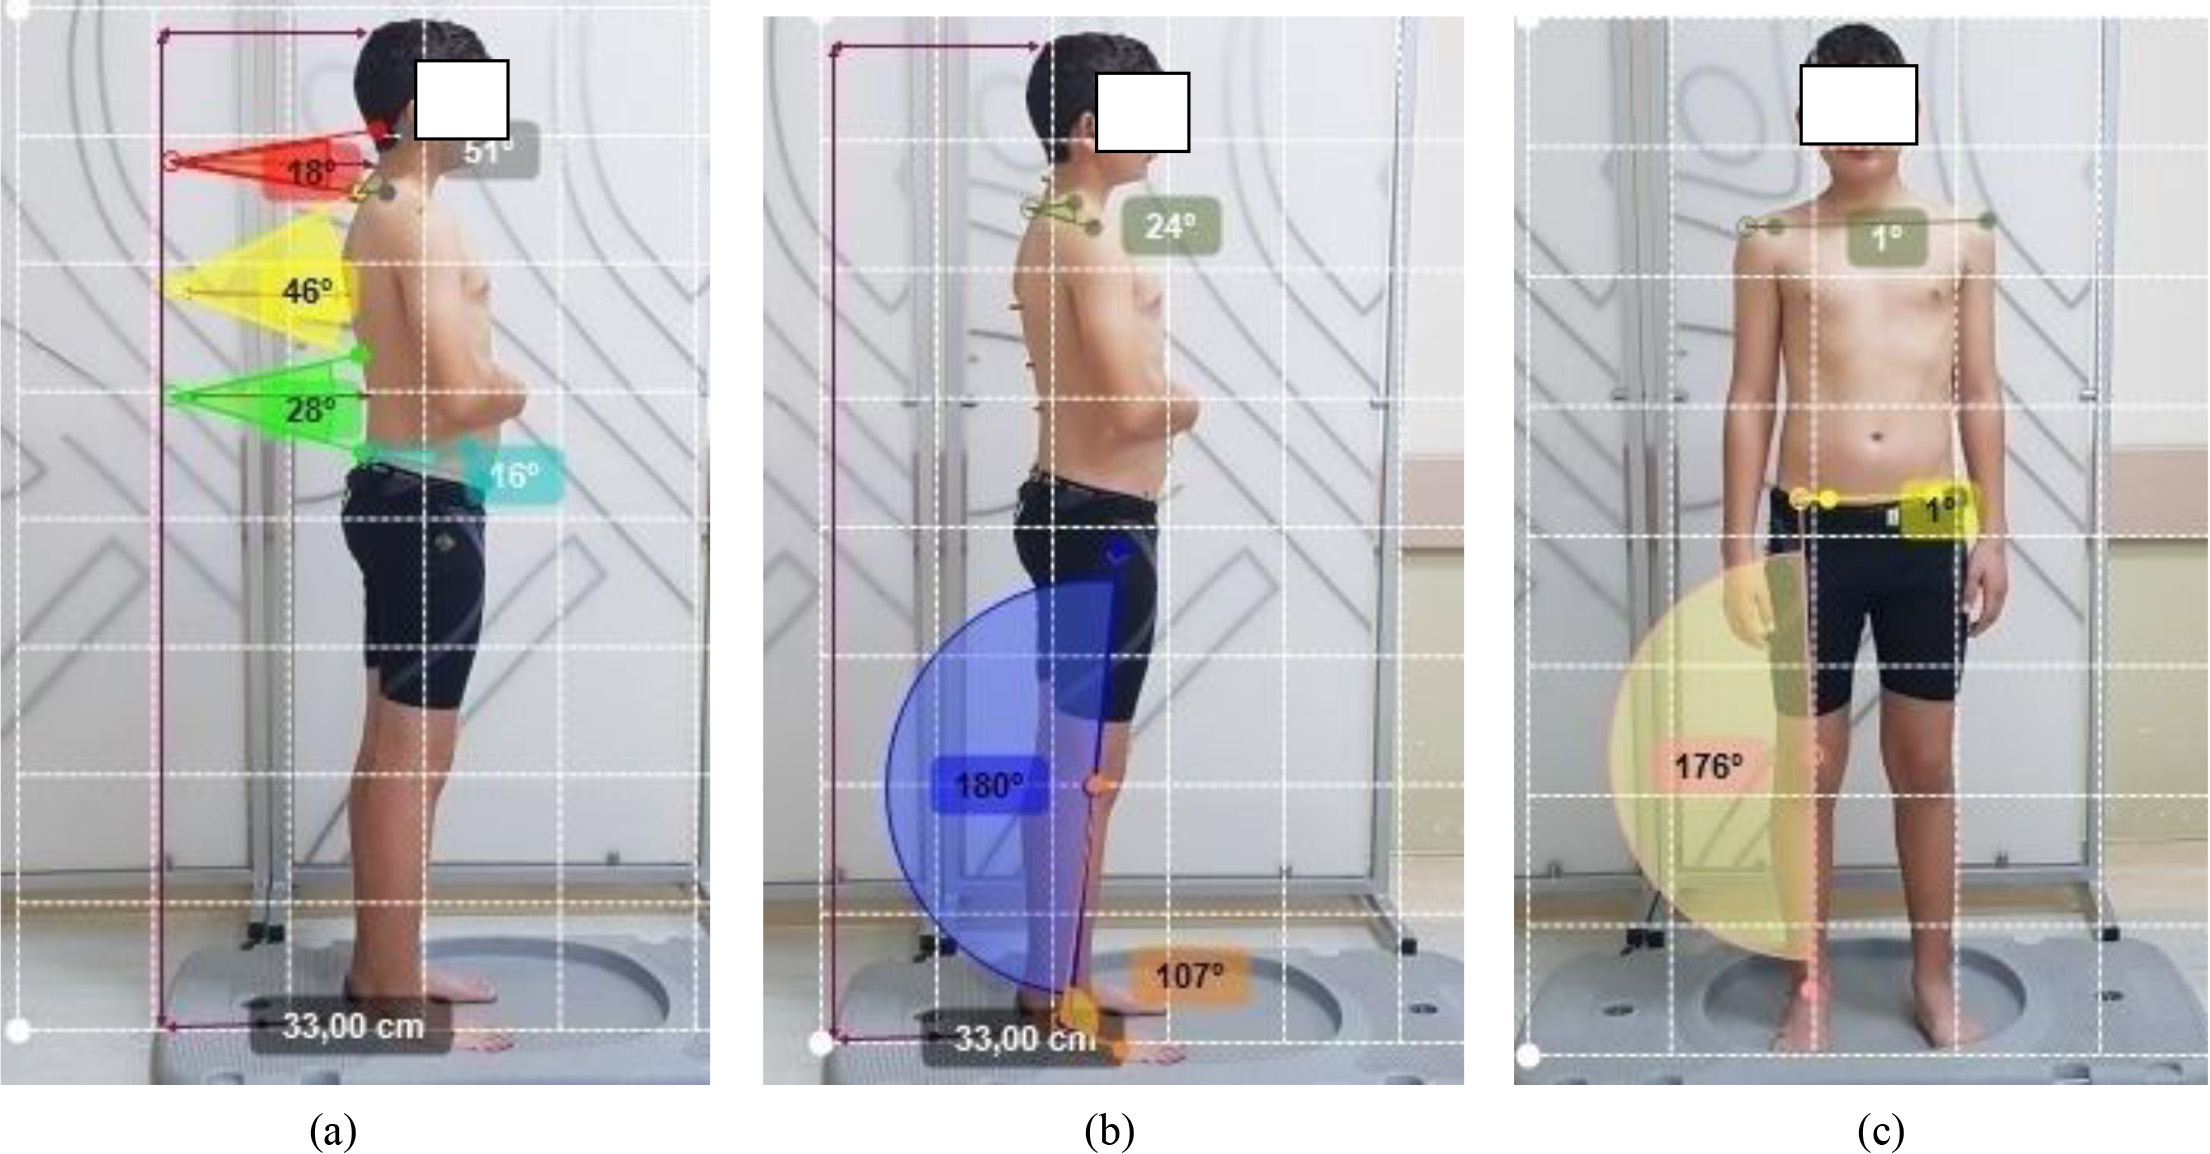 Images taken with admission for analysis of posture parameters with Kinovea®; a) Spinopelvic posture angles in sagittal plane; grey angle for craniovertebral, red angle for cervical lordosis, yellow angle for thoracic kyphosis, green angle for lumbal lordosis, and blue angle for sagittal pelvic tilt; b) Extremity posture angles in sagittal plane; khaki angle for shoulder protraction, dark blue angle for knee flexion, and dark orange angle for ankle plantar flexion [calculated by the formula (angle obtained with Kinovea®)–90]; c) Posture angles in frontal plane; dark green angle for shoulder asymmetry, yellow angle for pelvis asymmetry, and pink angle for knee valgus.